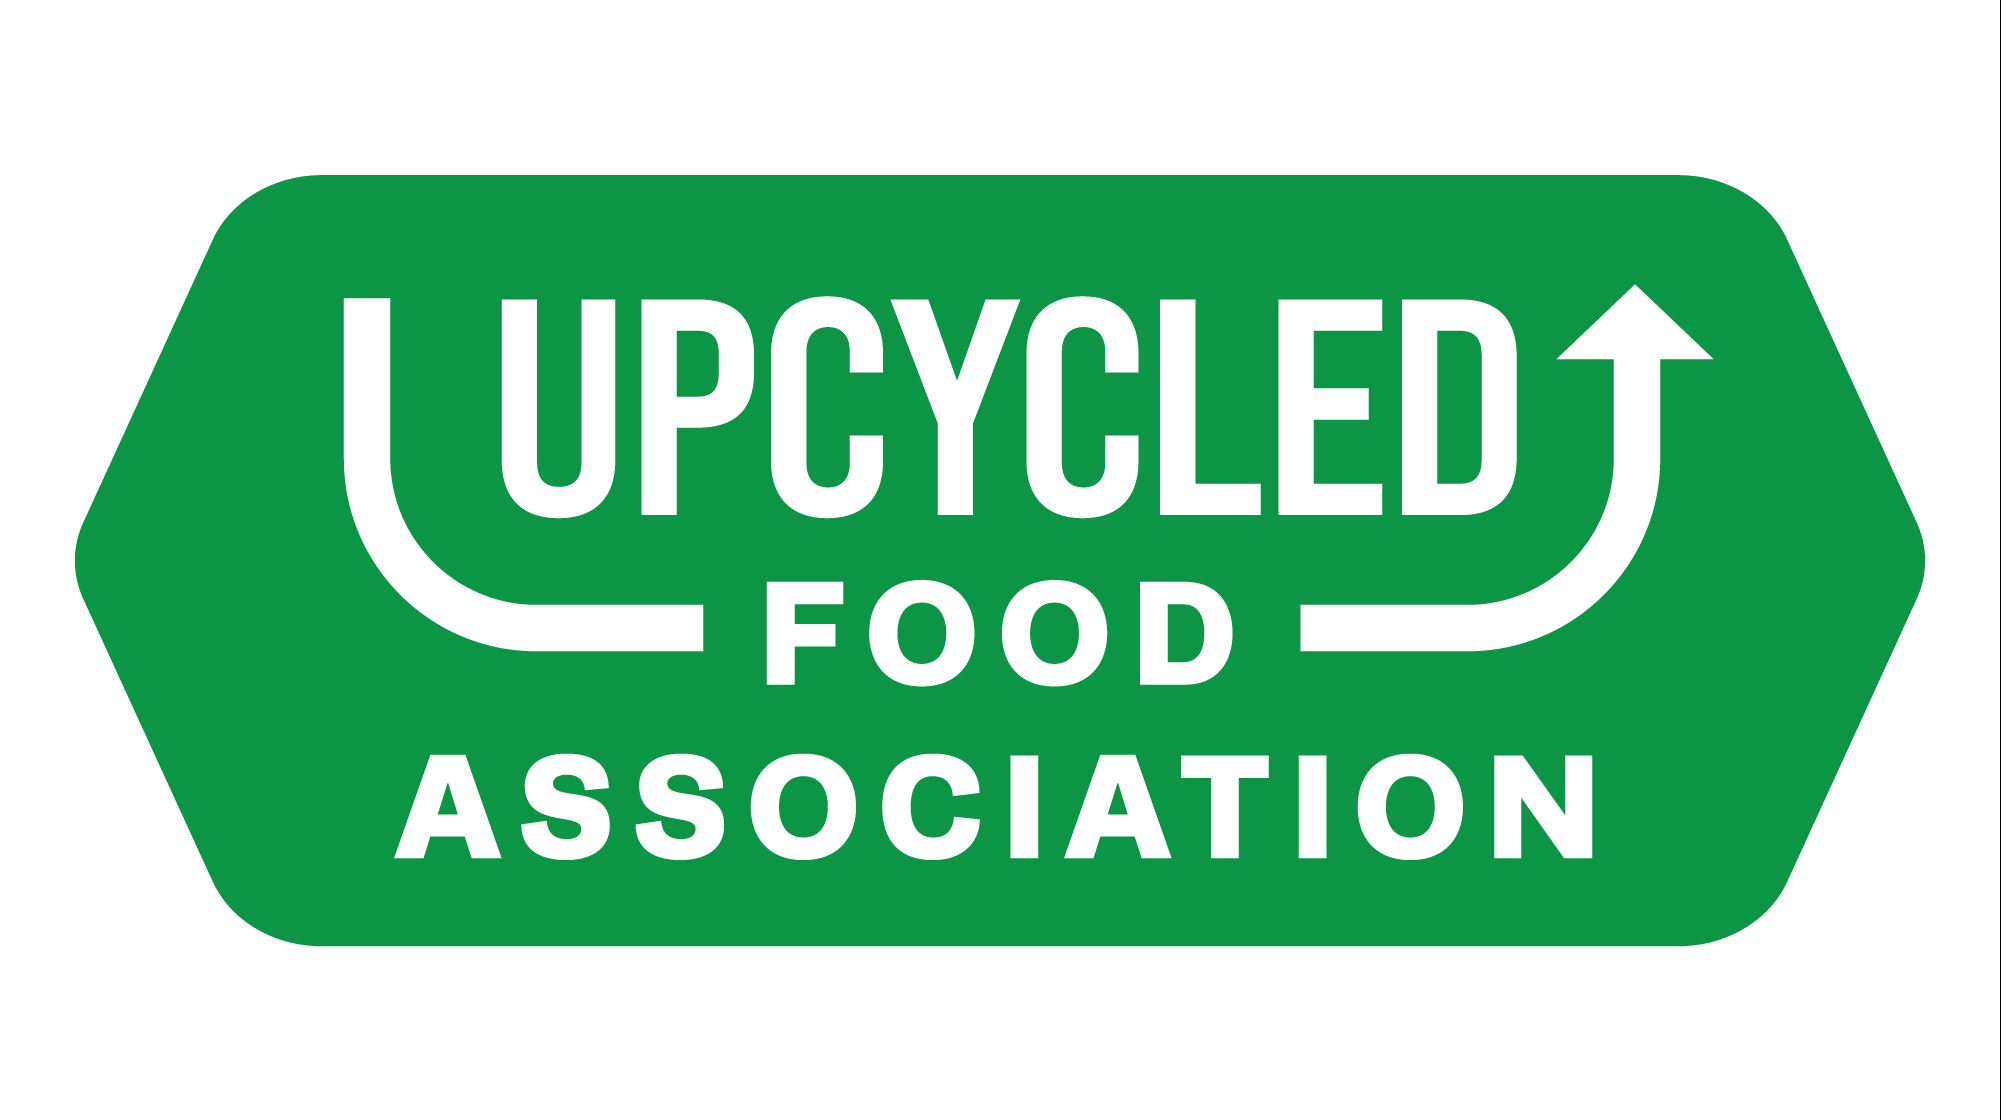 Upcycled Food Association aims to provide innovative solutions to food ...